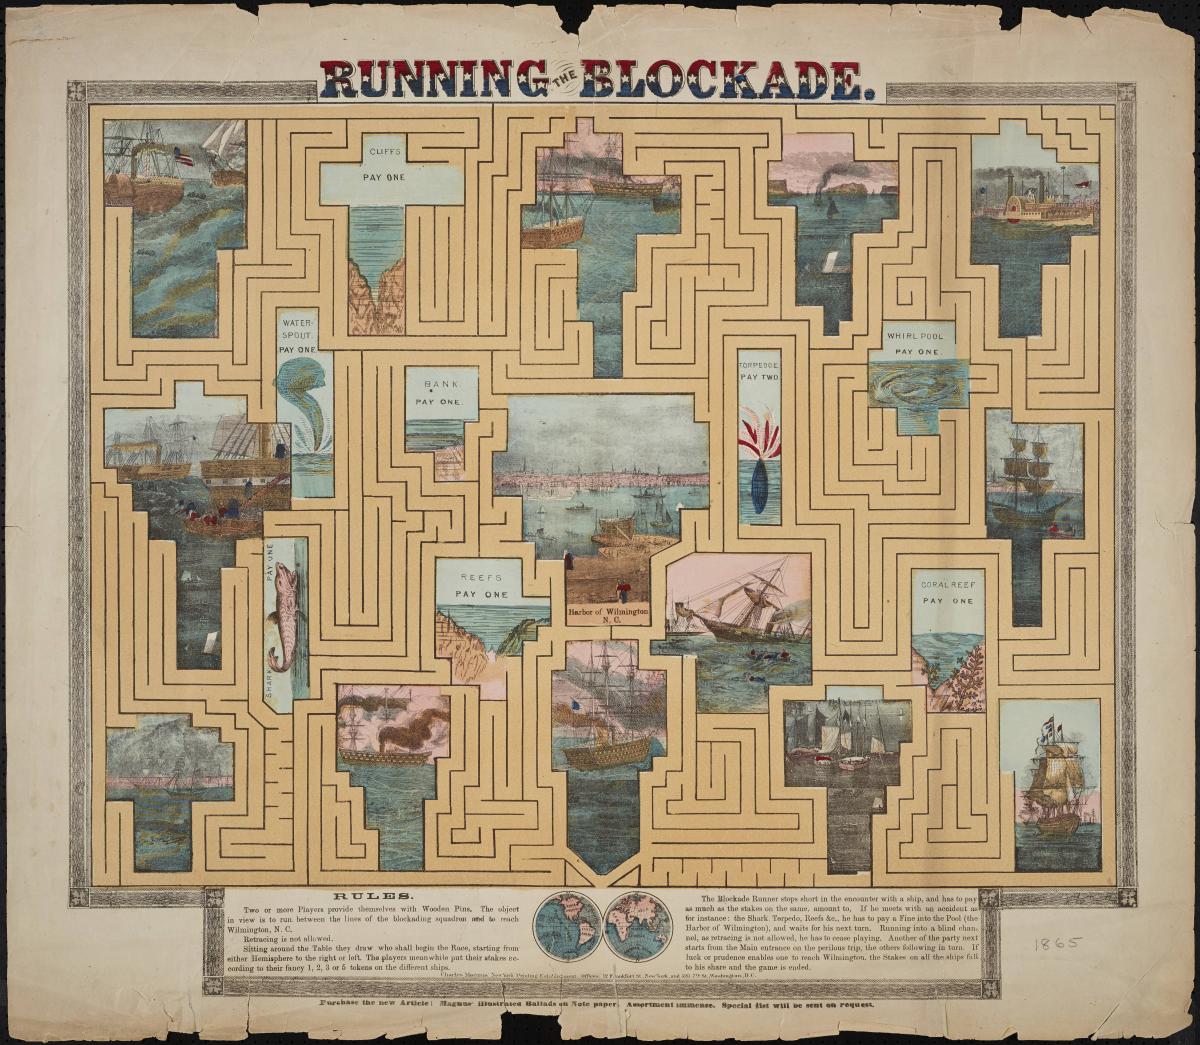 Running the Blockade Board Game, courtesy of UNC Libraries.